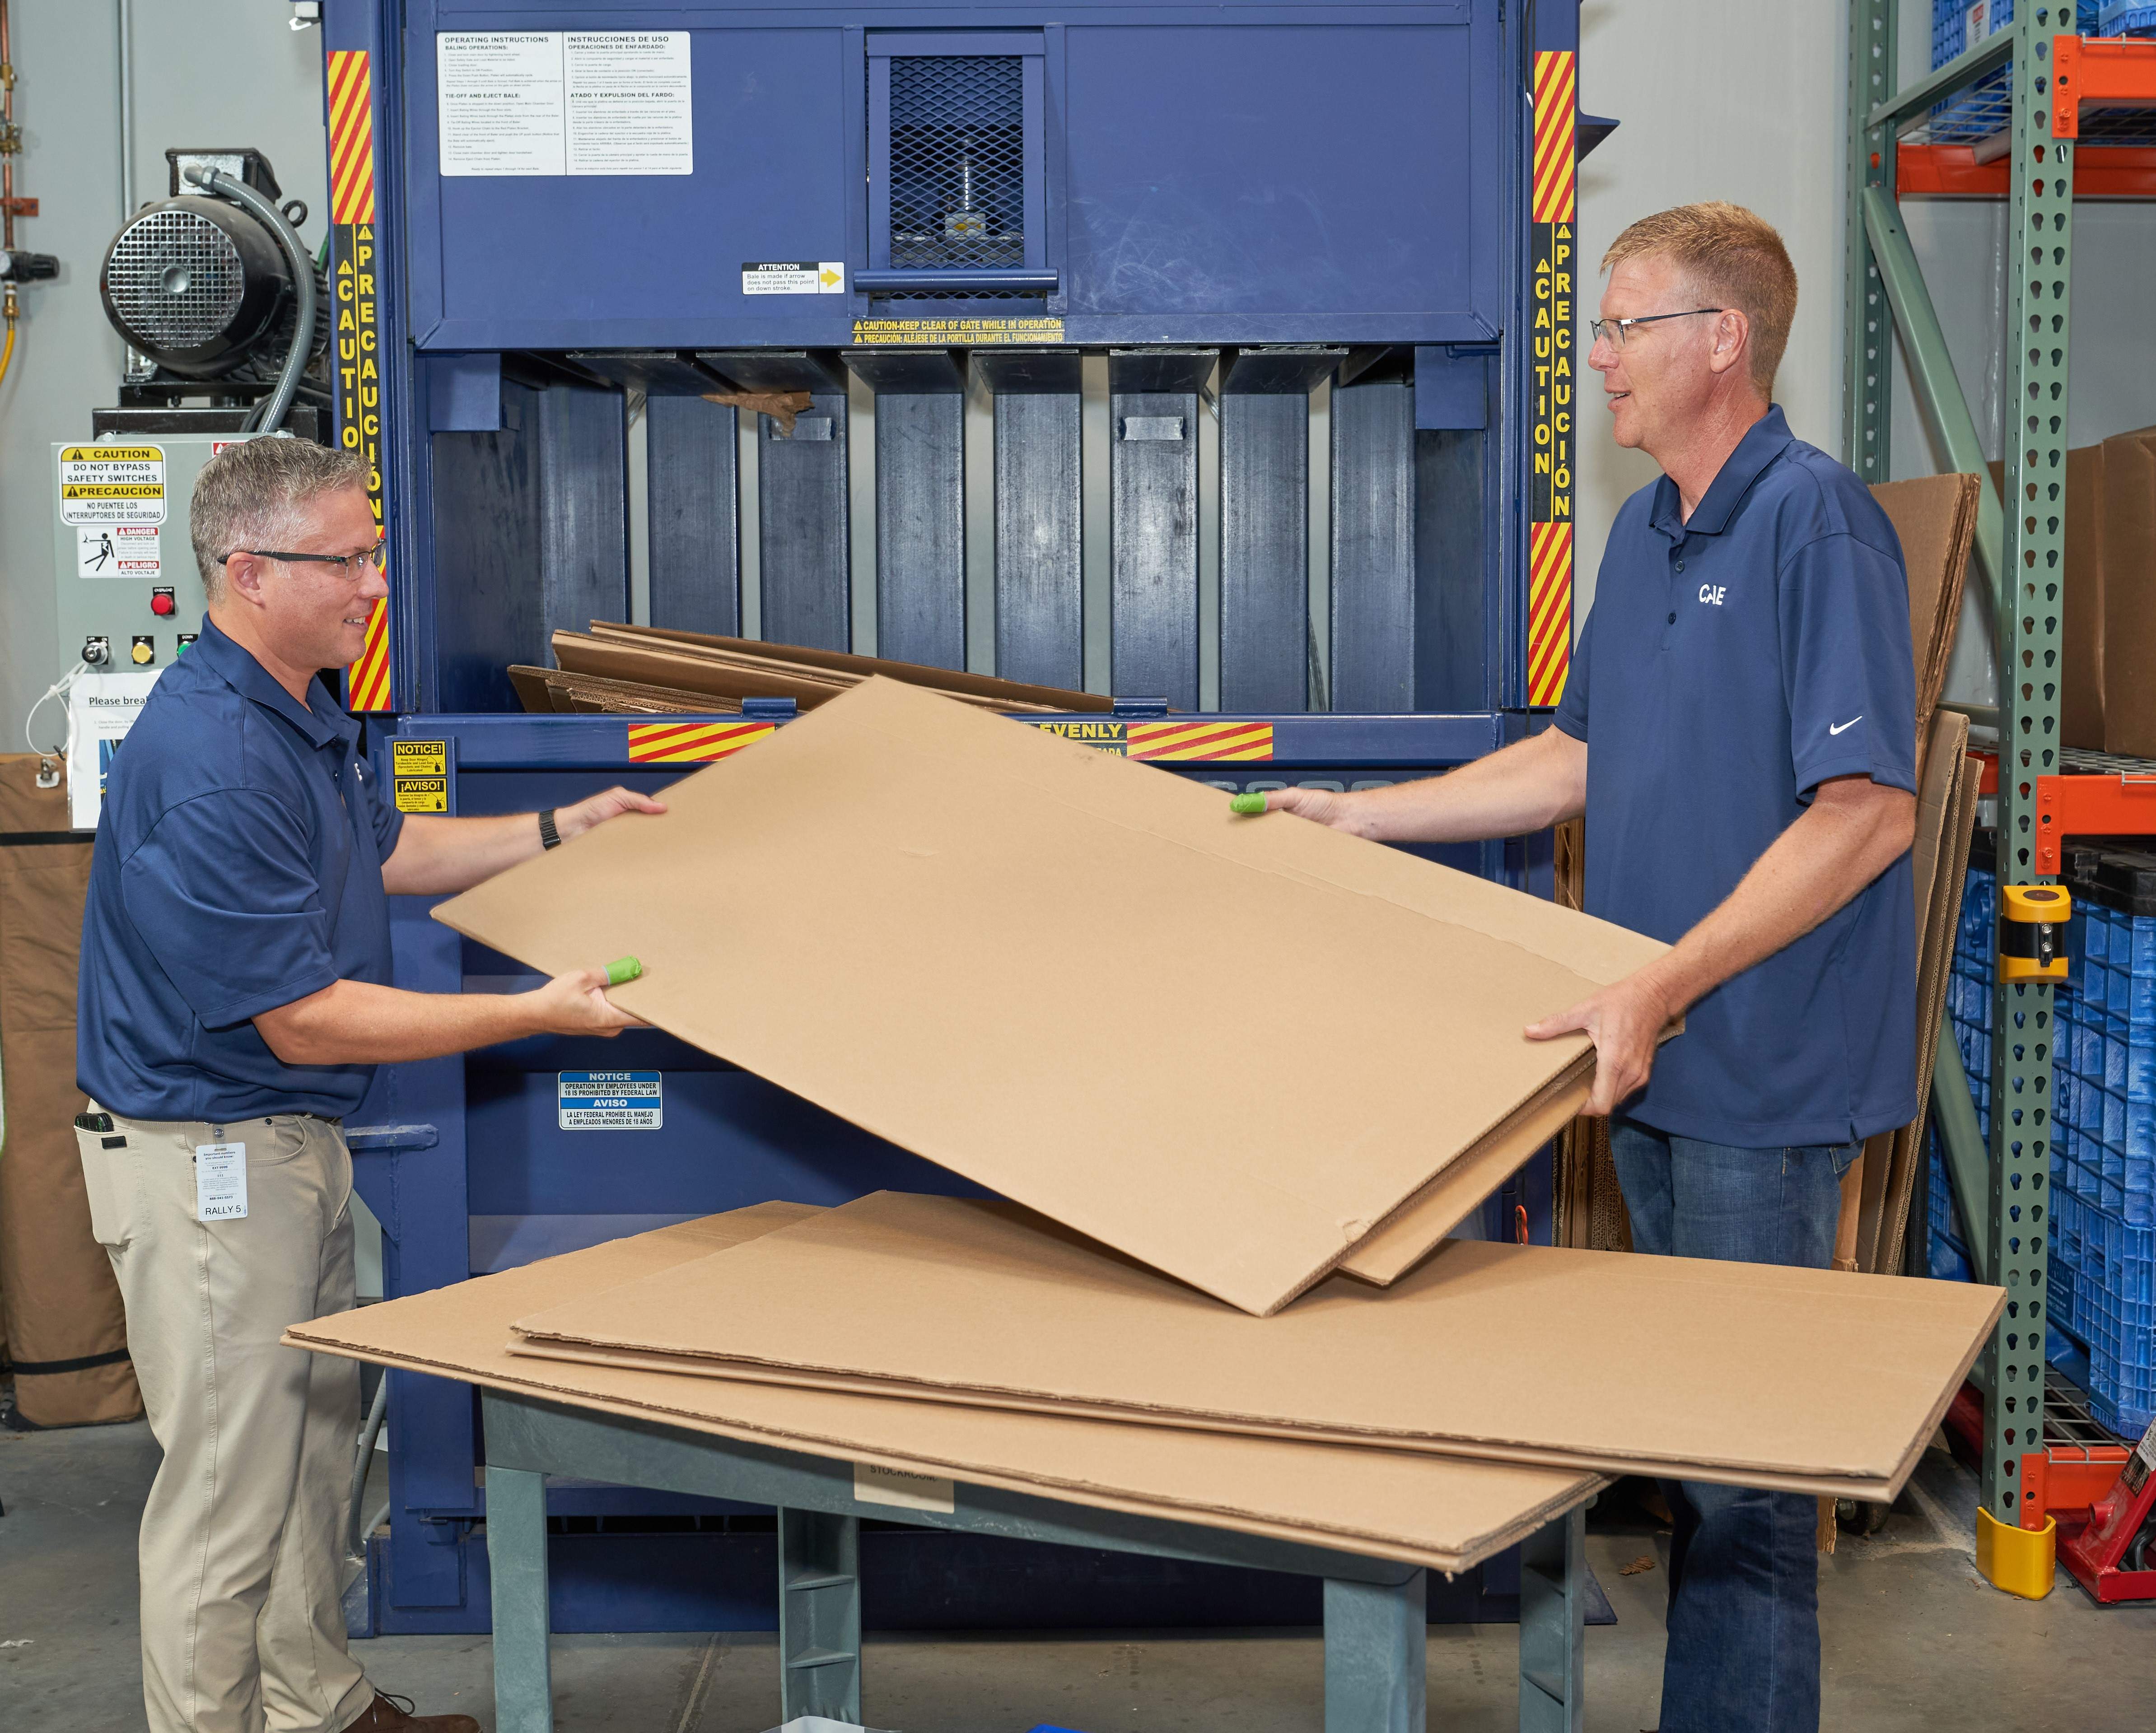 CAE Healthcare employees load boxes into an on-site baler for more efficient recycling.